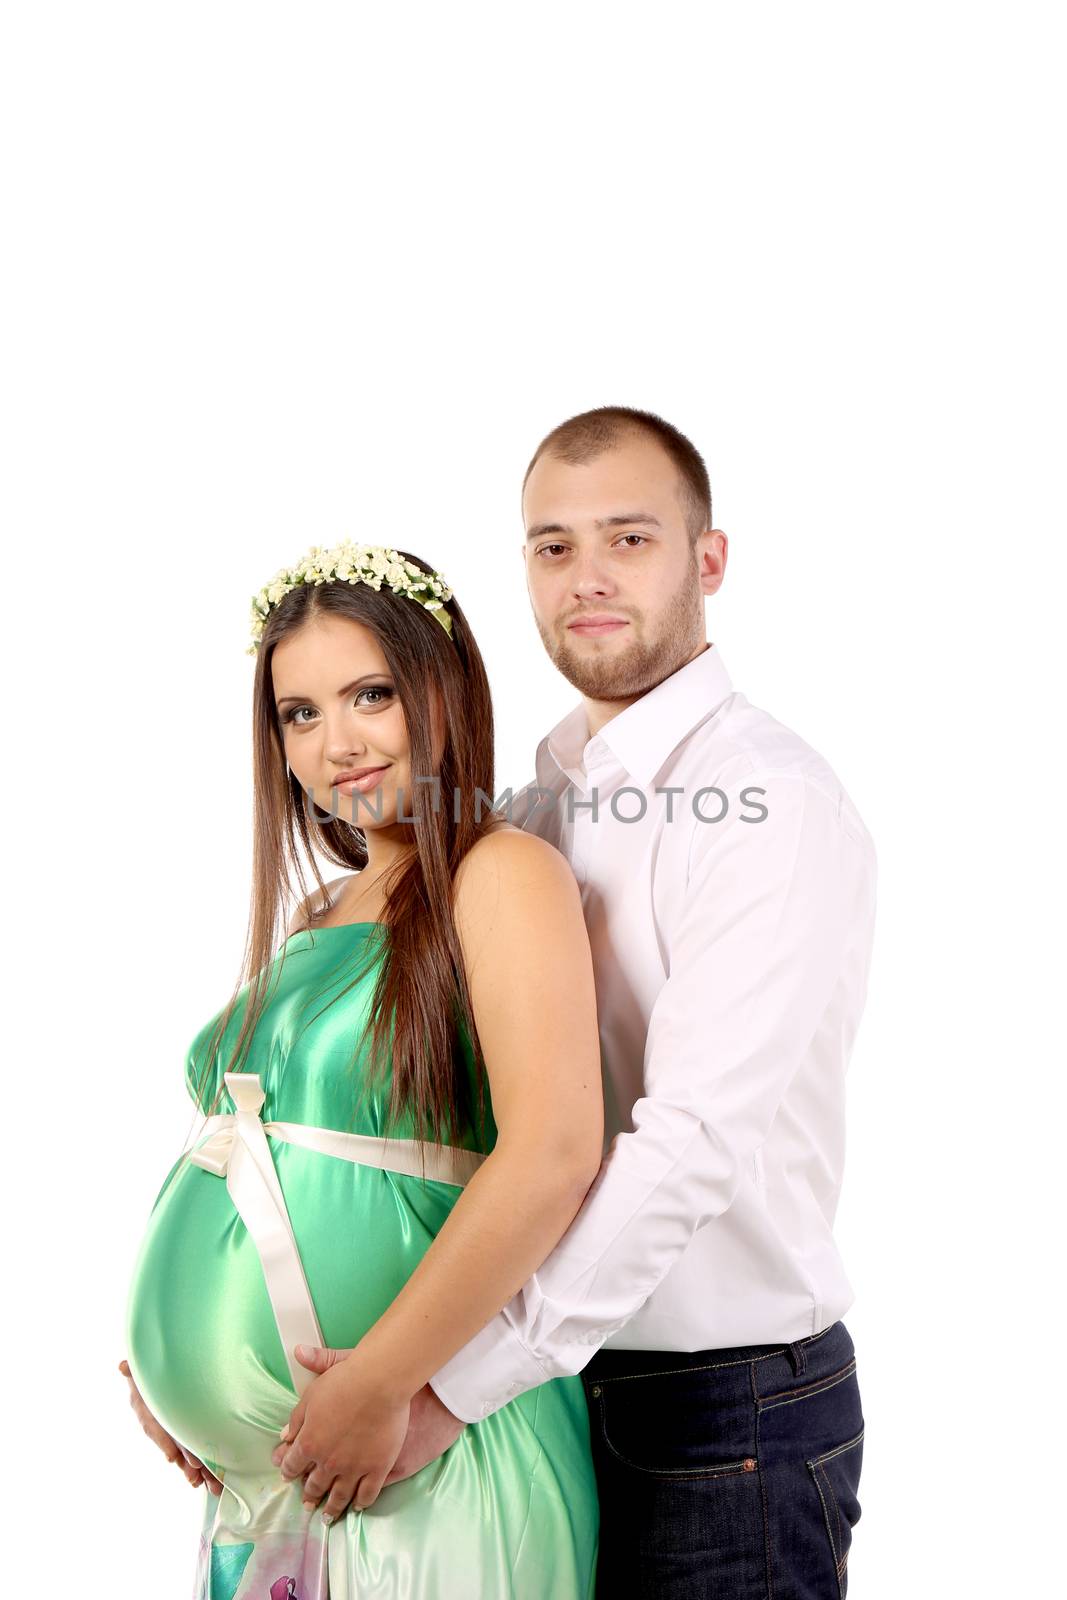 Happy couple expecting baby. Isolated on a white background.